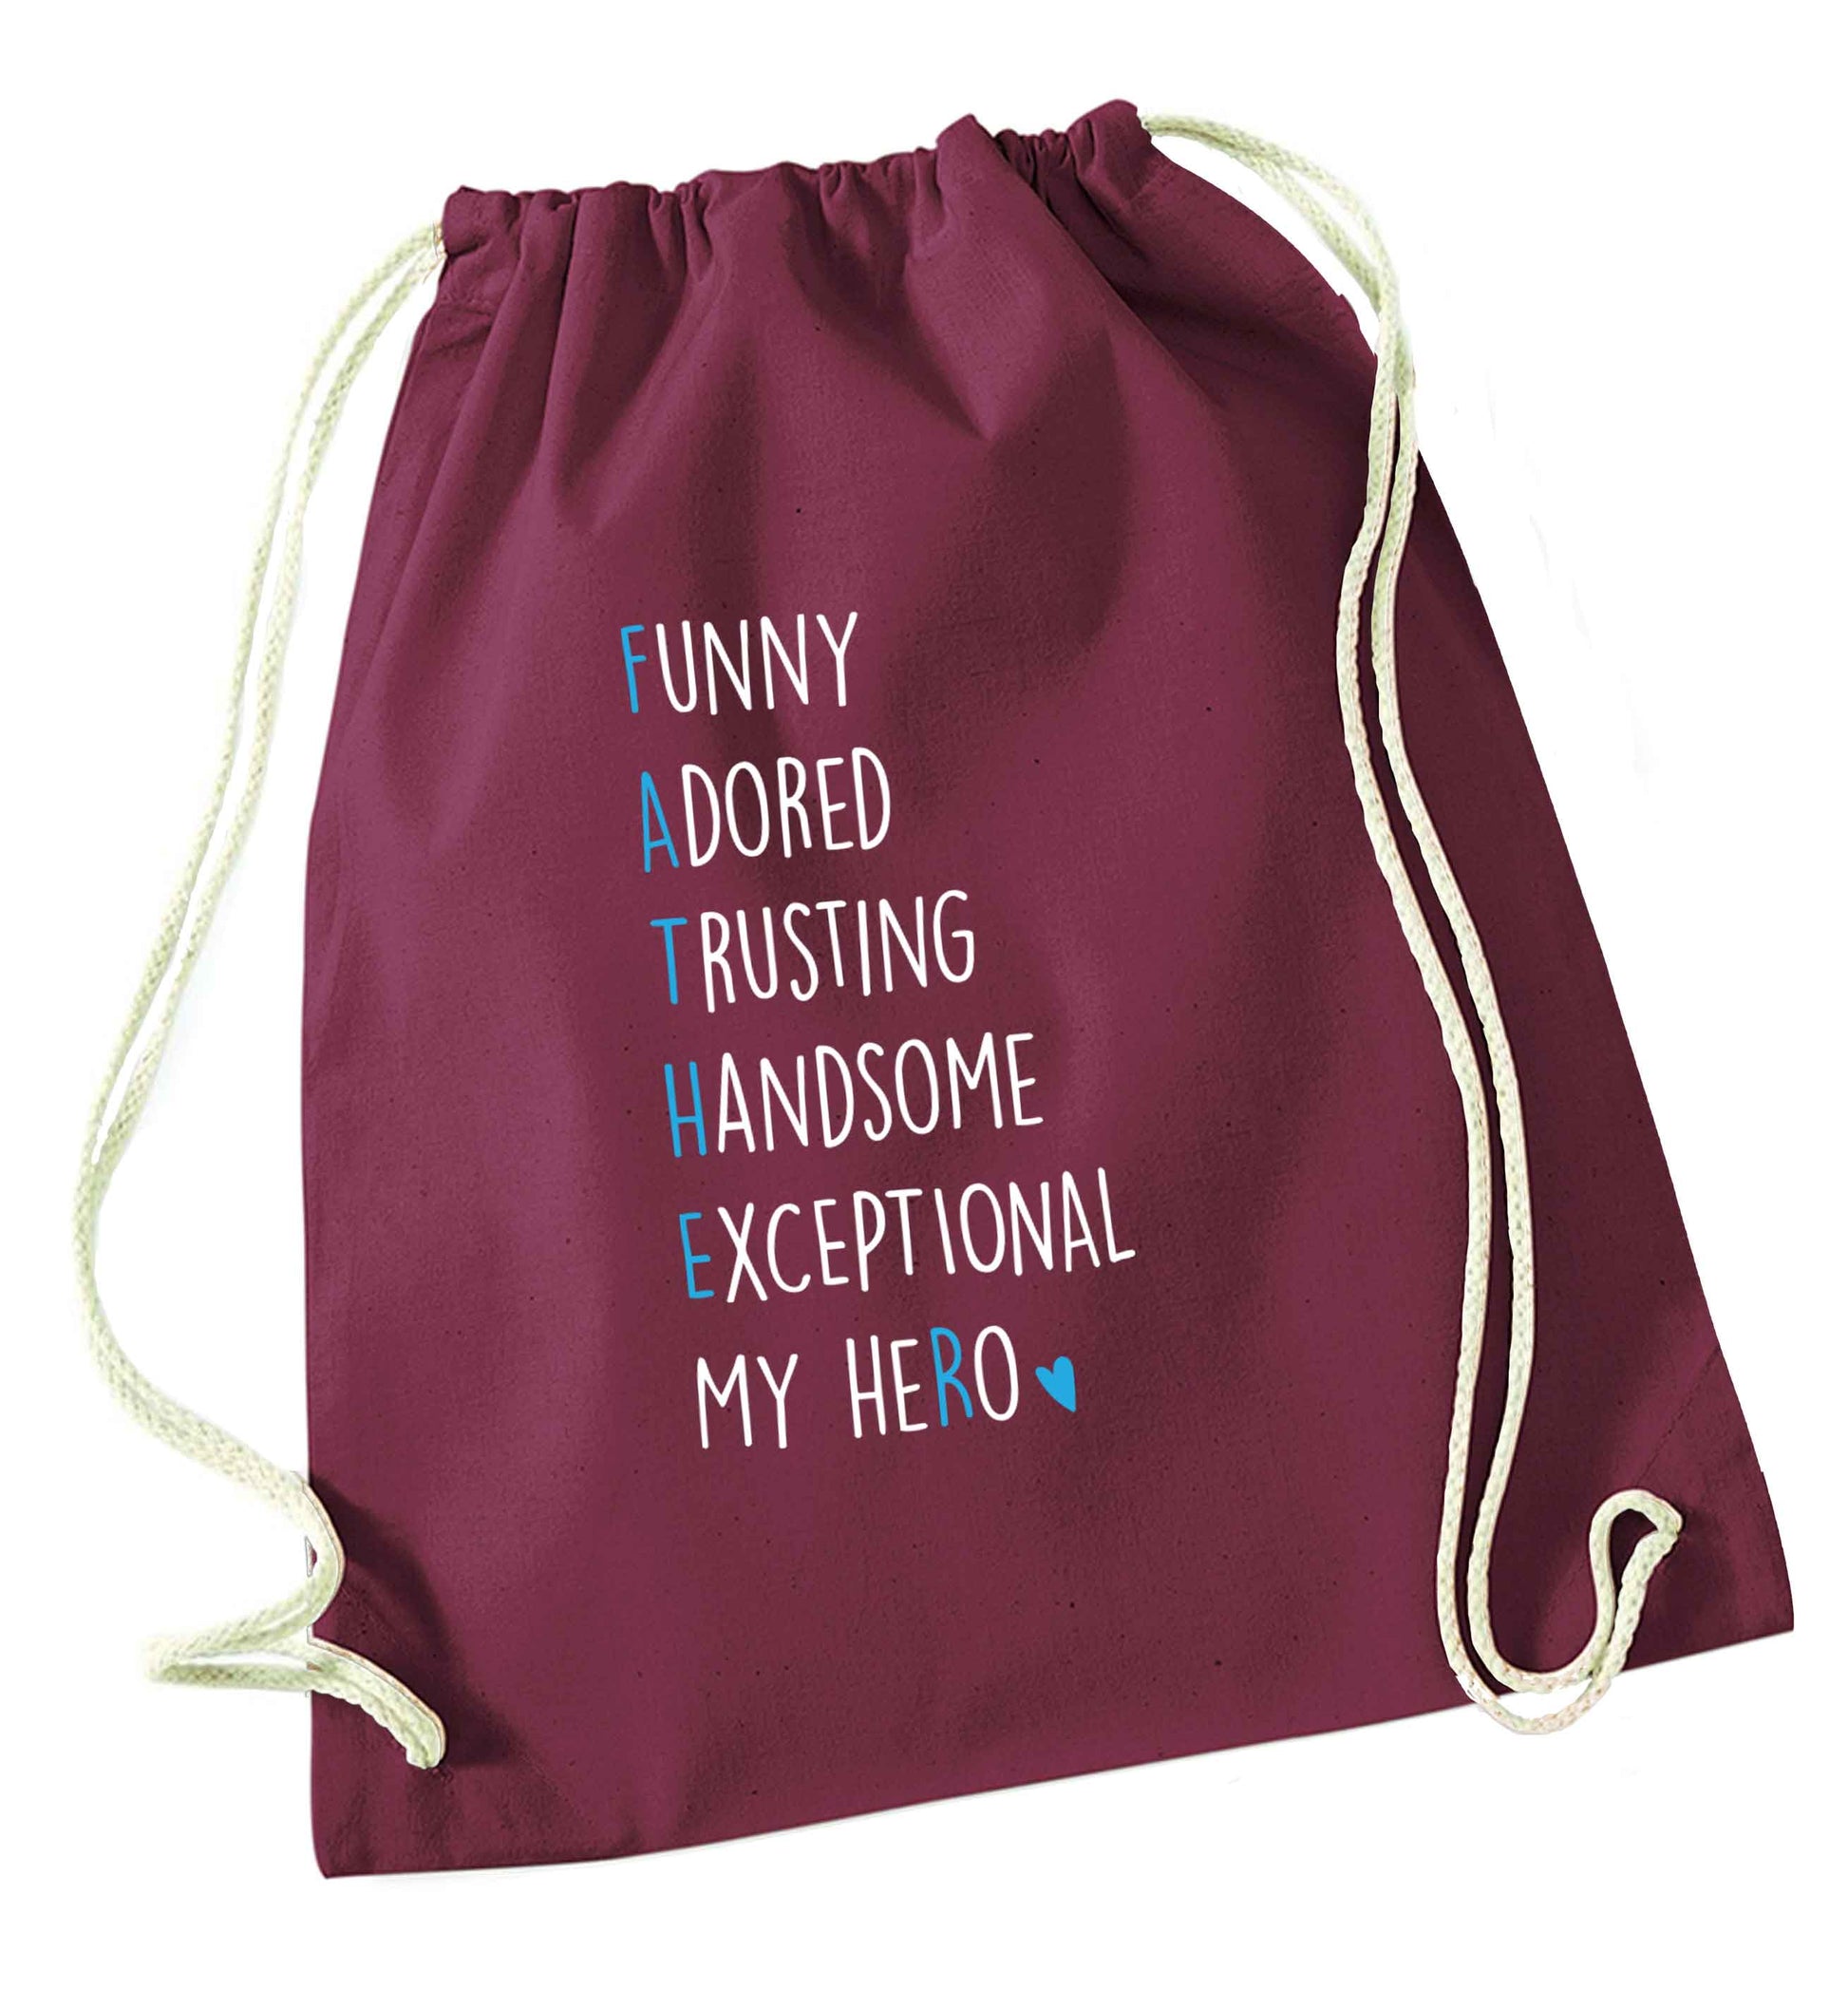 Father meaning hero acrostic poem maroon drawstring bag